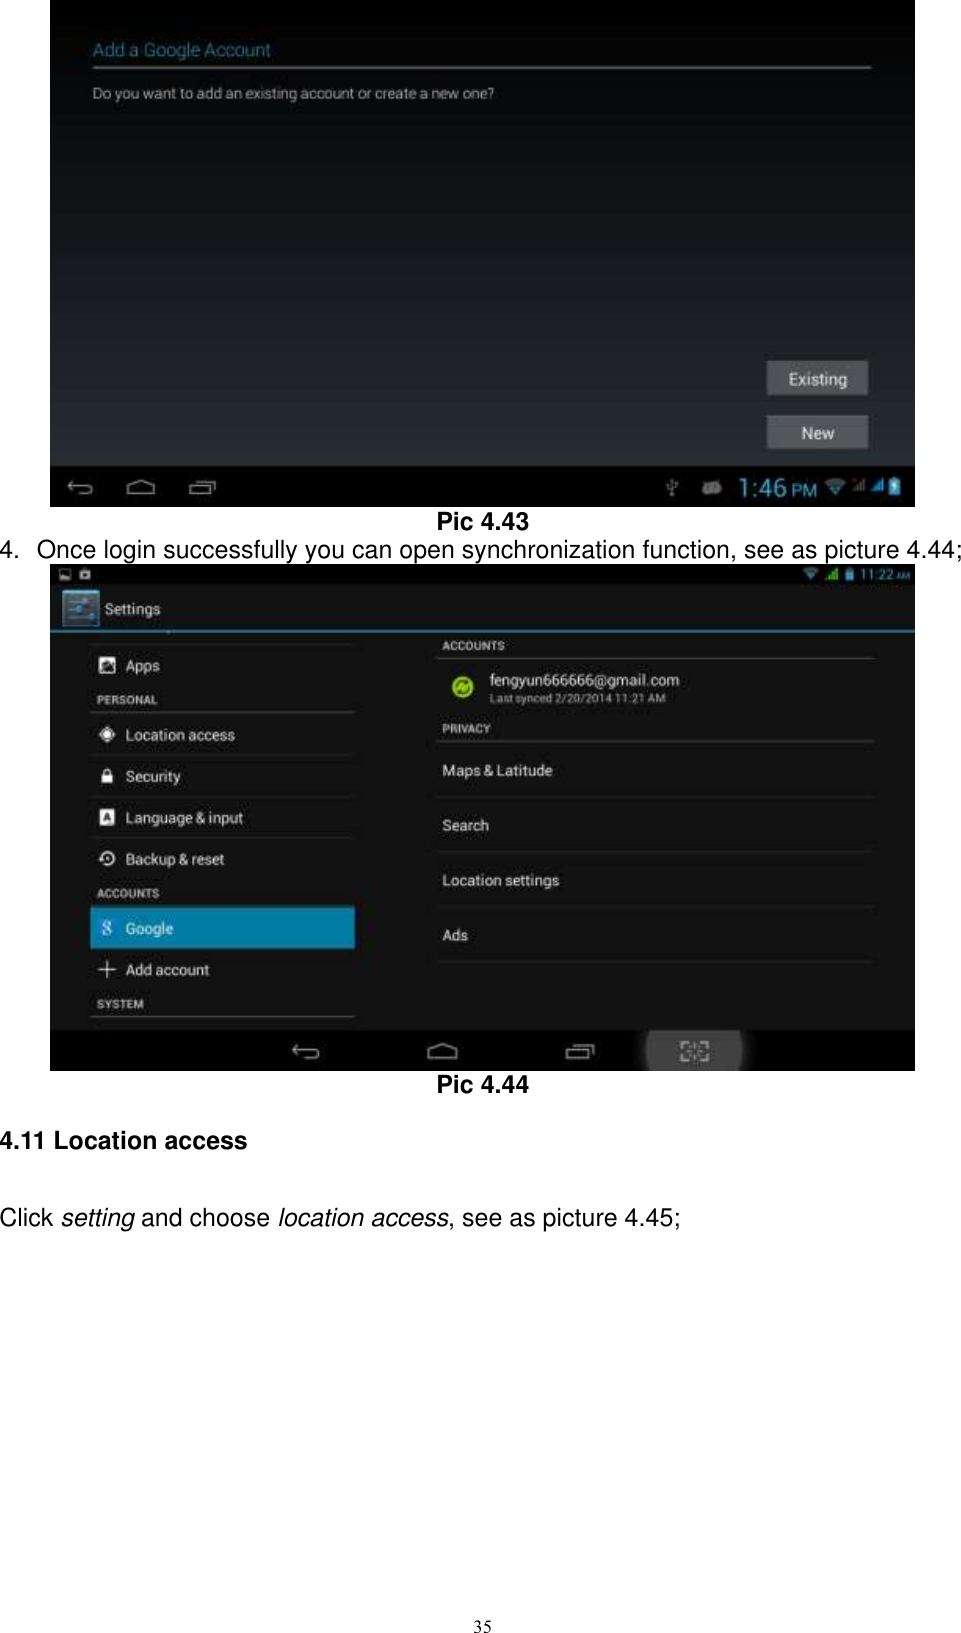      35  Pic 4.43 4.  Once login successfully you can open synchronization function, see as picture 4.44;  Pic 4.44 4.11 Location access Click setting and choose location access, see as picture 4.45;    